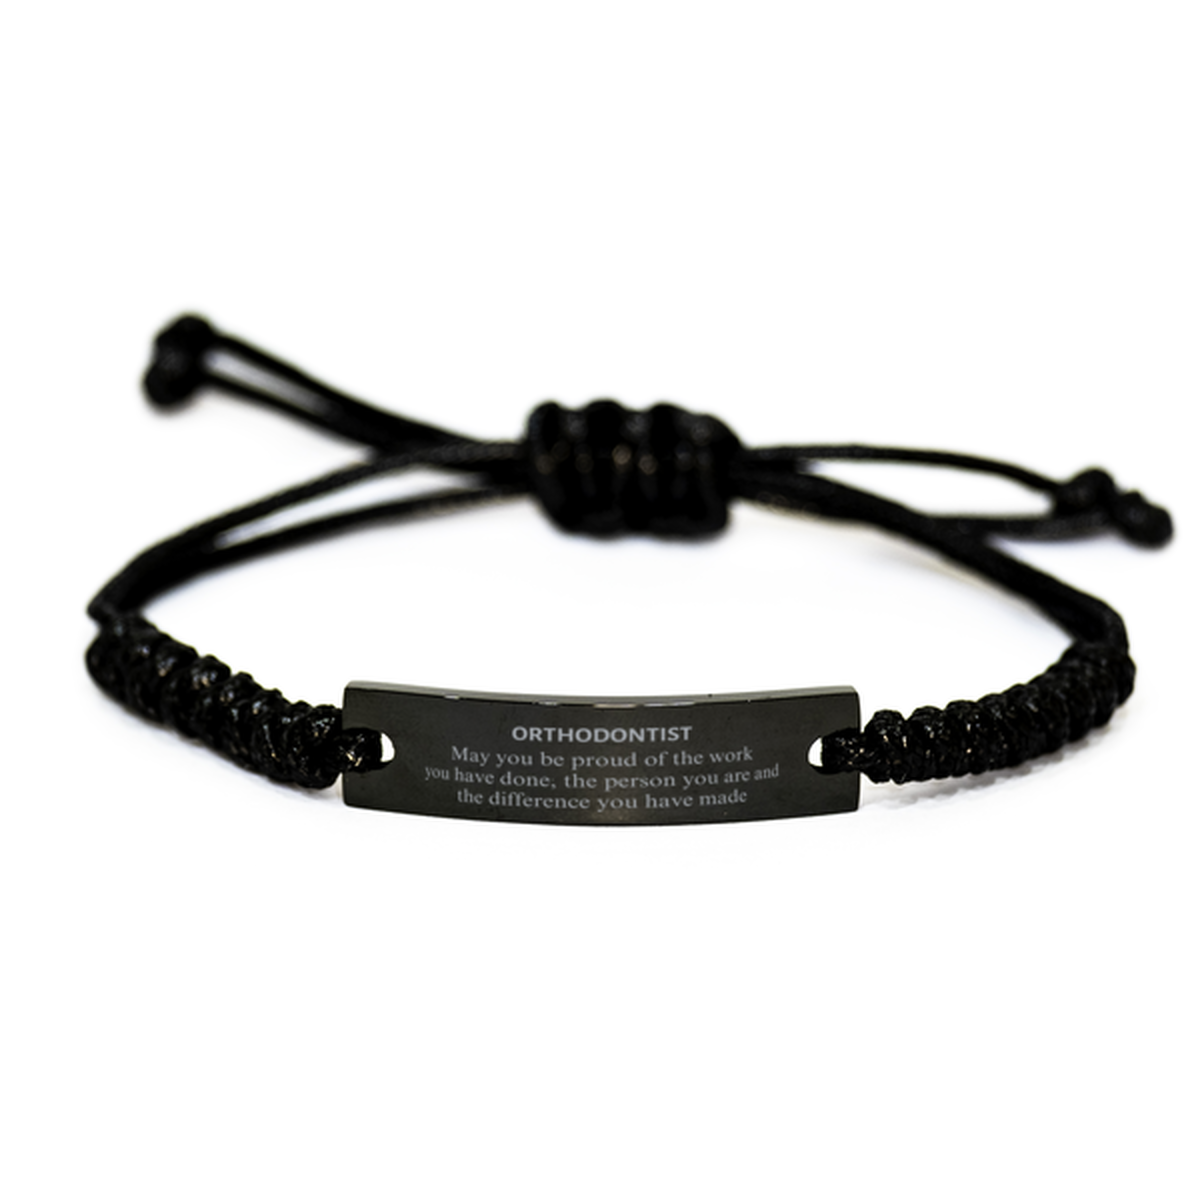 Orthodontist May you be proud of the work you have done, Retirement Orthodontist Black Rope Bracelet for Colleague Appreciation Gifts Amazing for Orthodontist